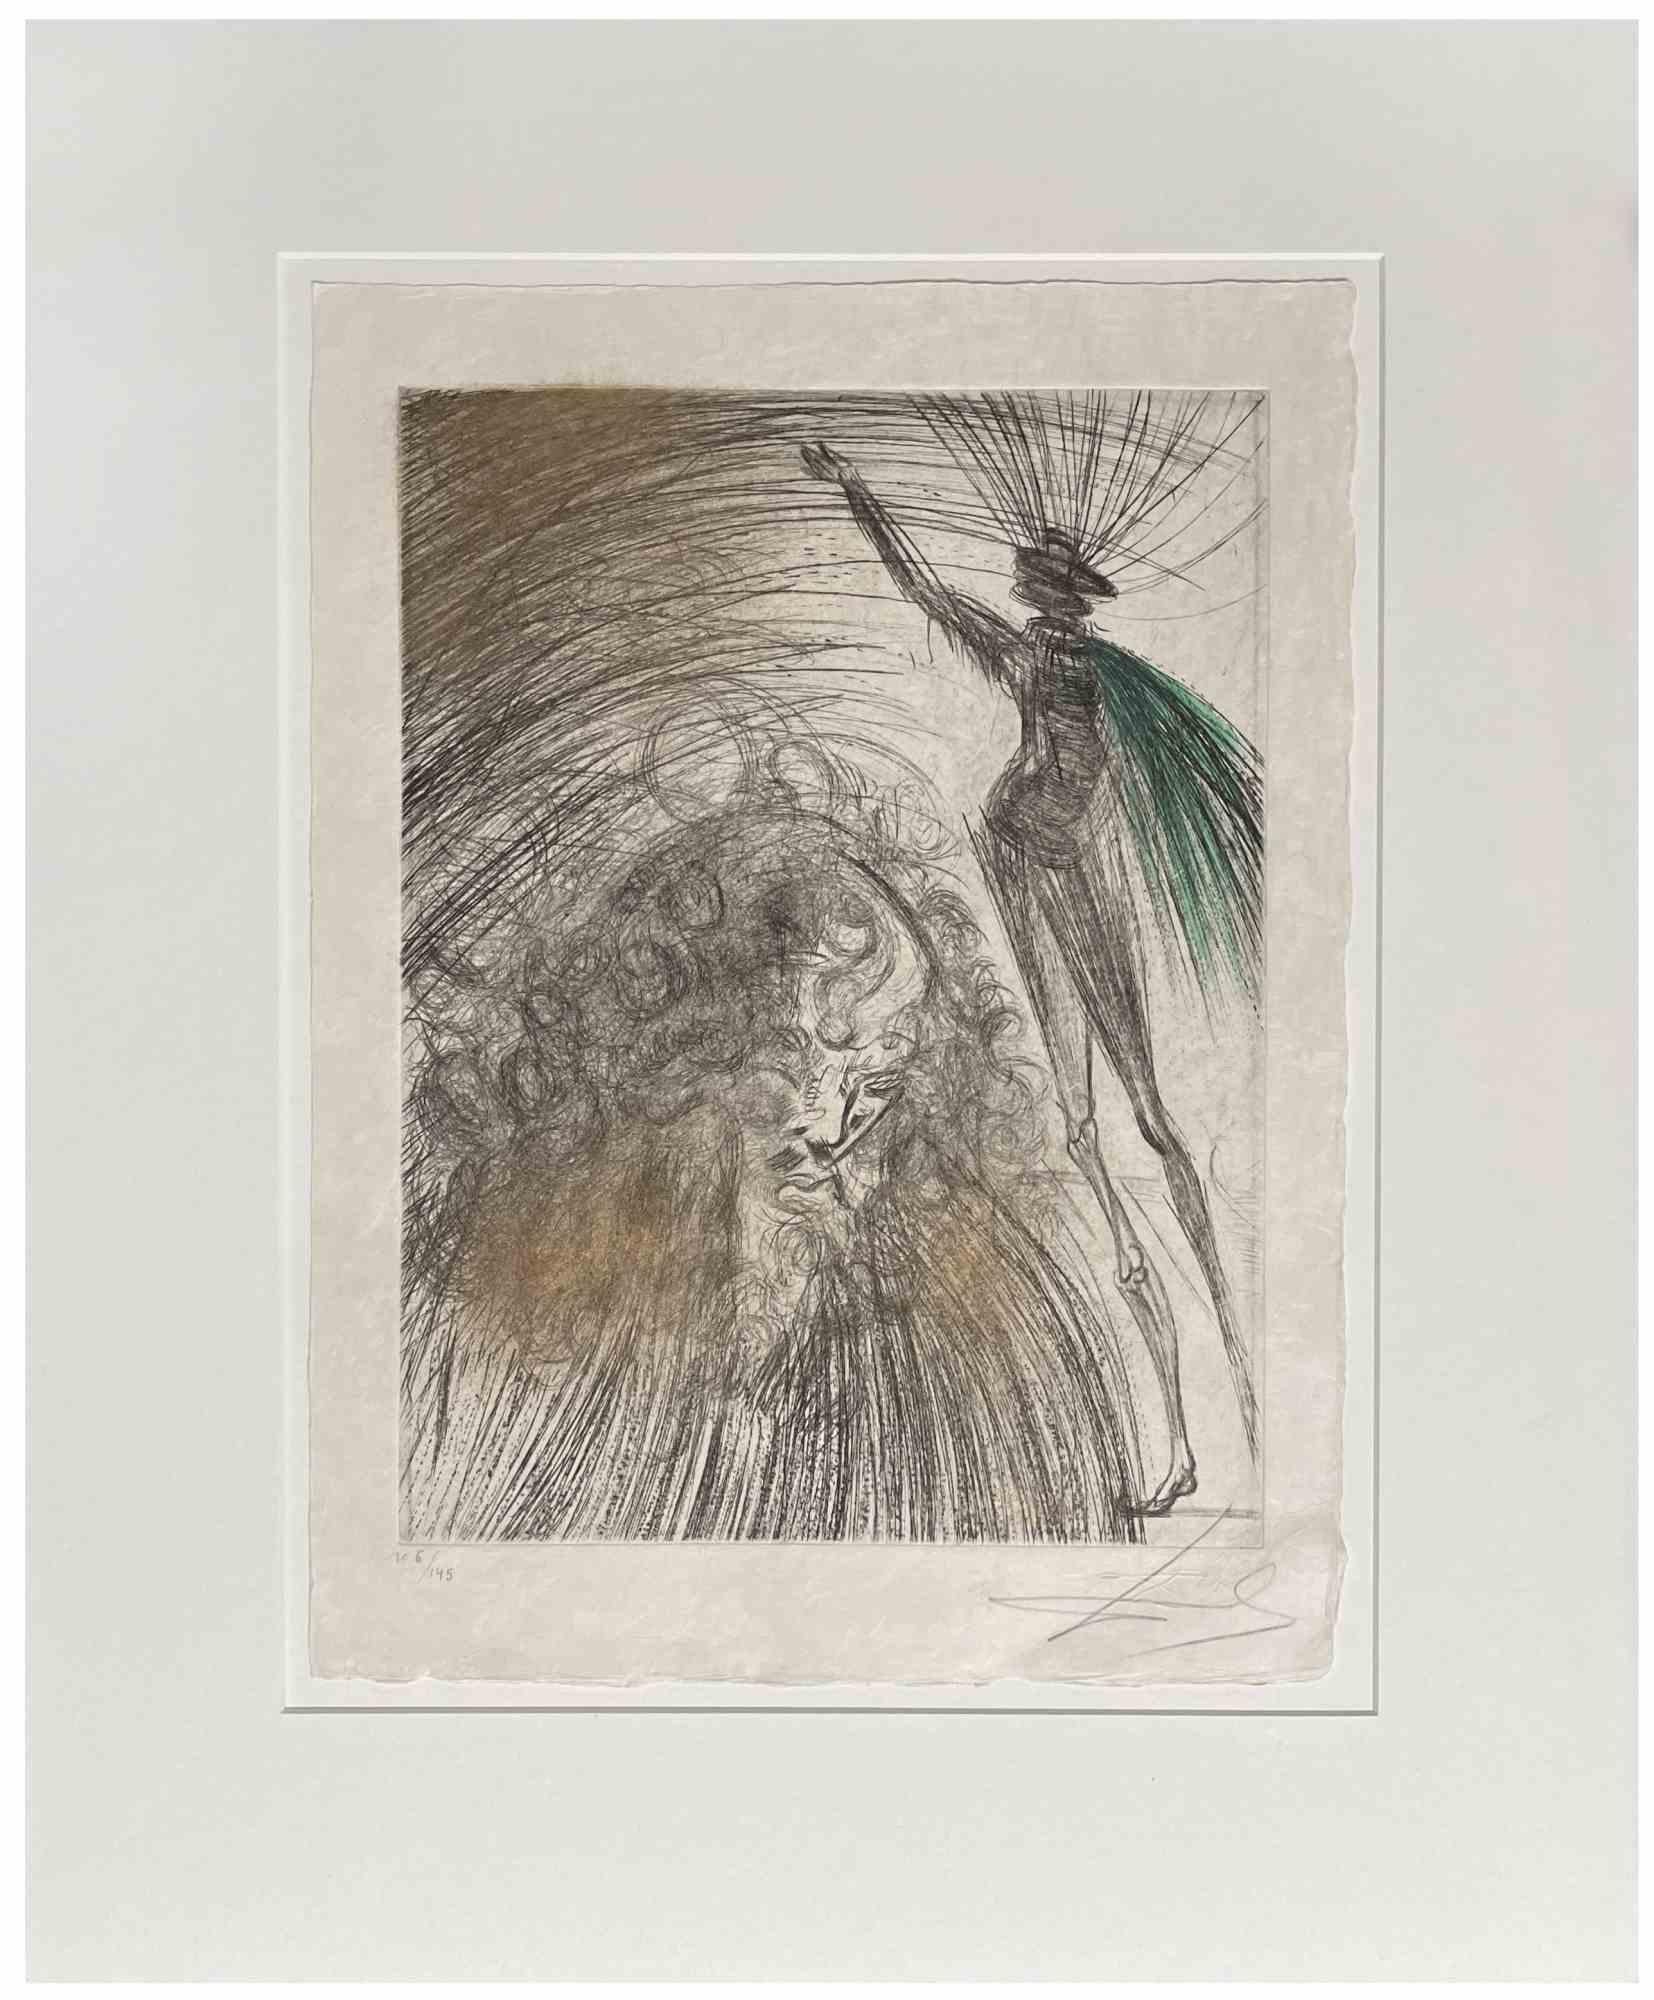 Salvador Dalí Figurative Print - Vieux Faust (Old Faust) - Etching  - 1960s